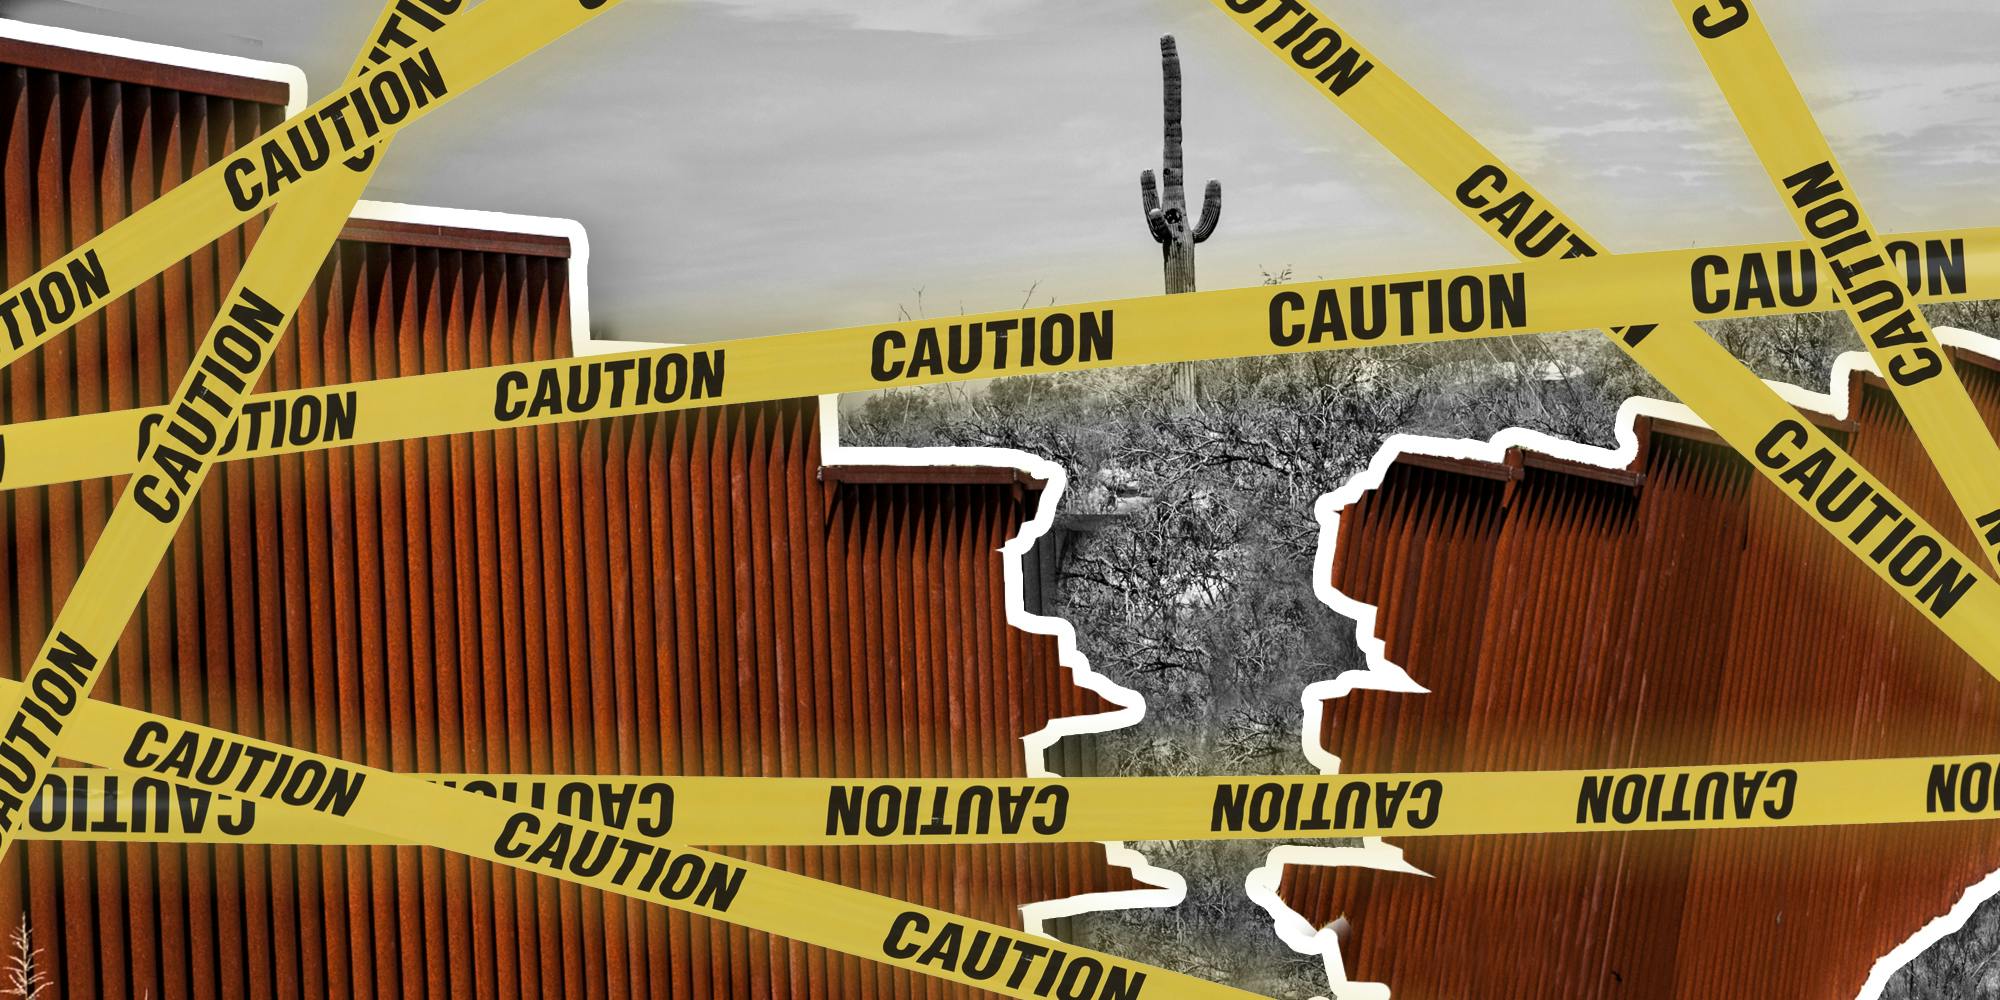 Border wall cracked in half with caution tape over it